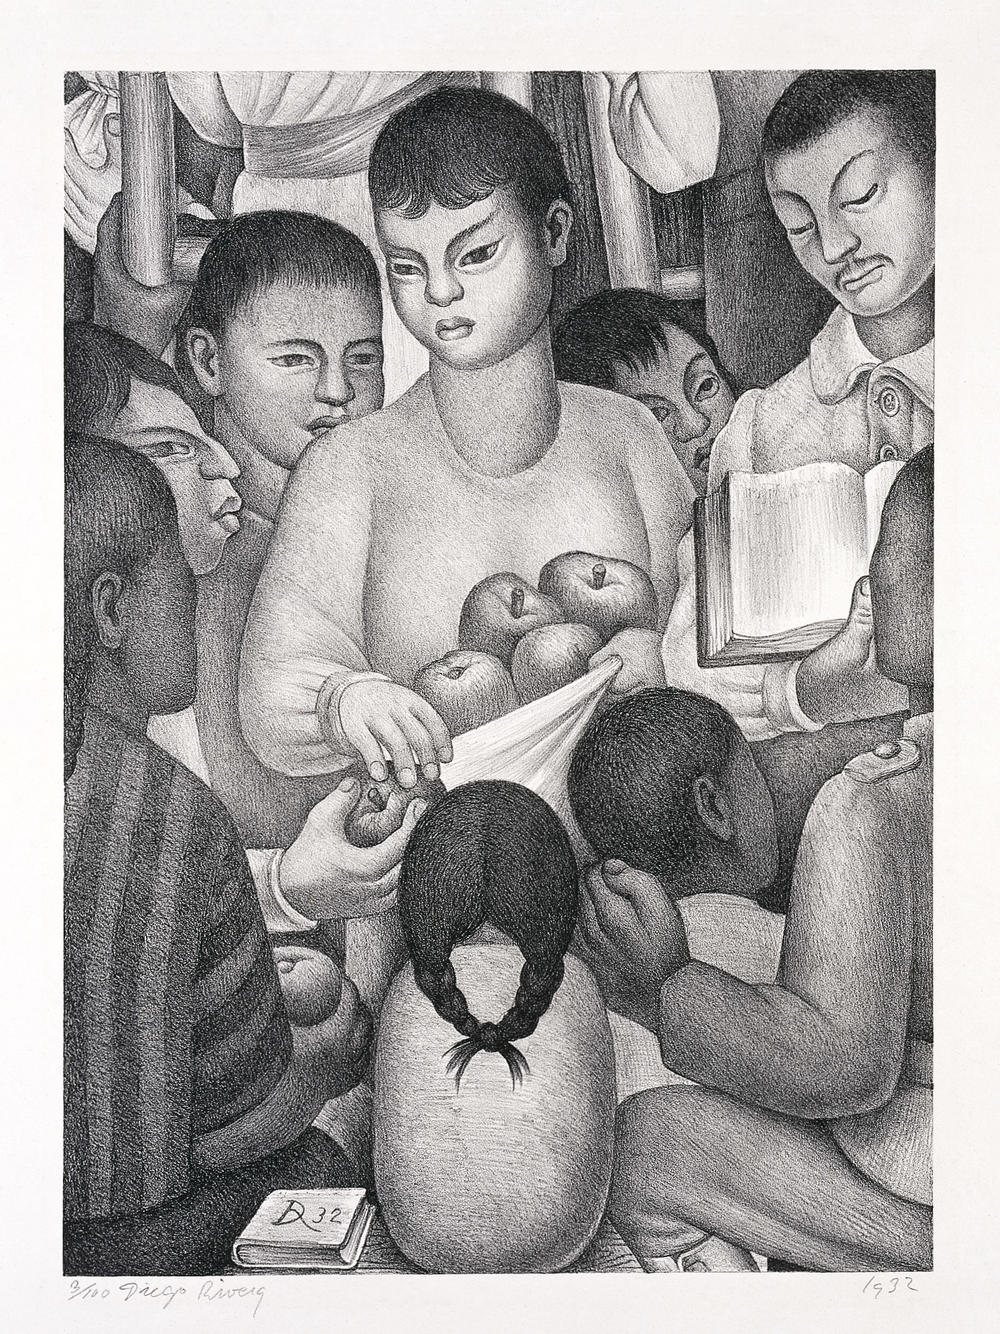 Diego Rivera, <em>The Fruits of Labor,</em> 1932, lithograph. Collection of the McNay Art Museum, Gift of the Friends of the McNay.